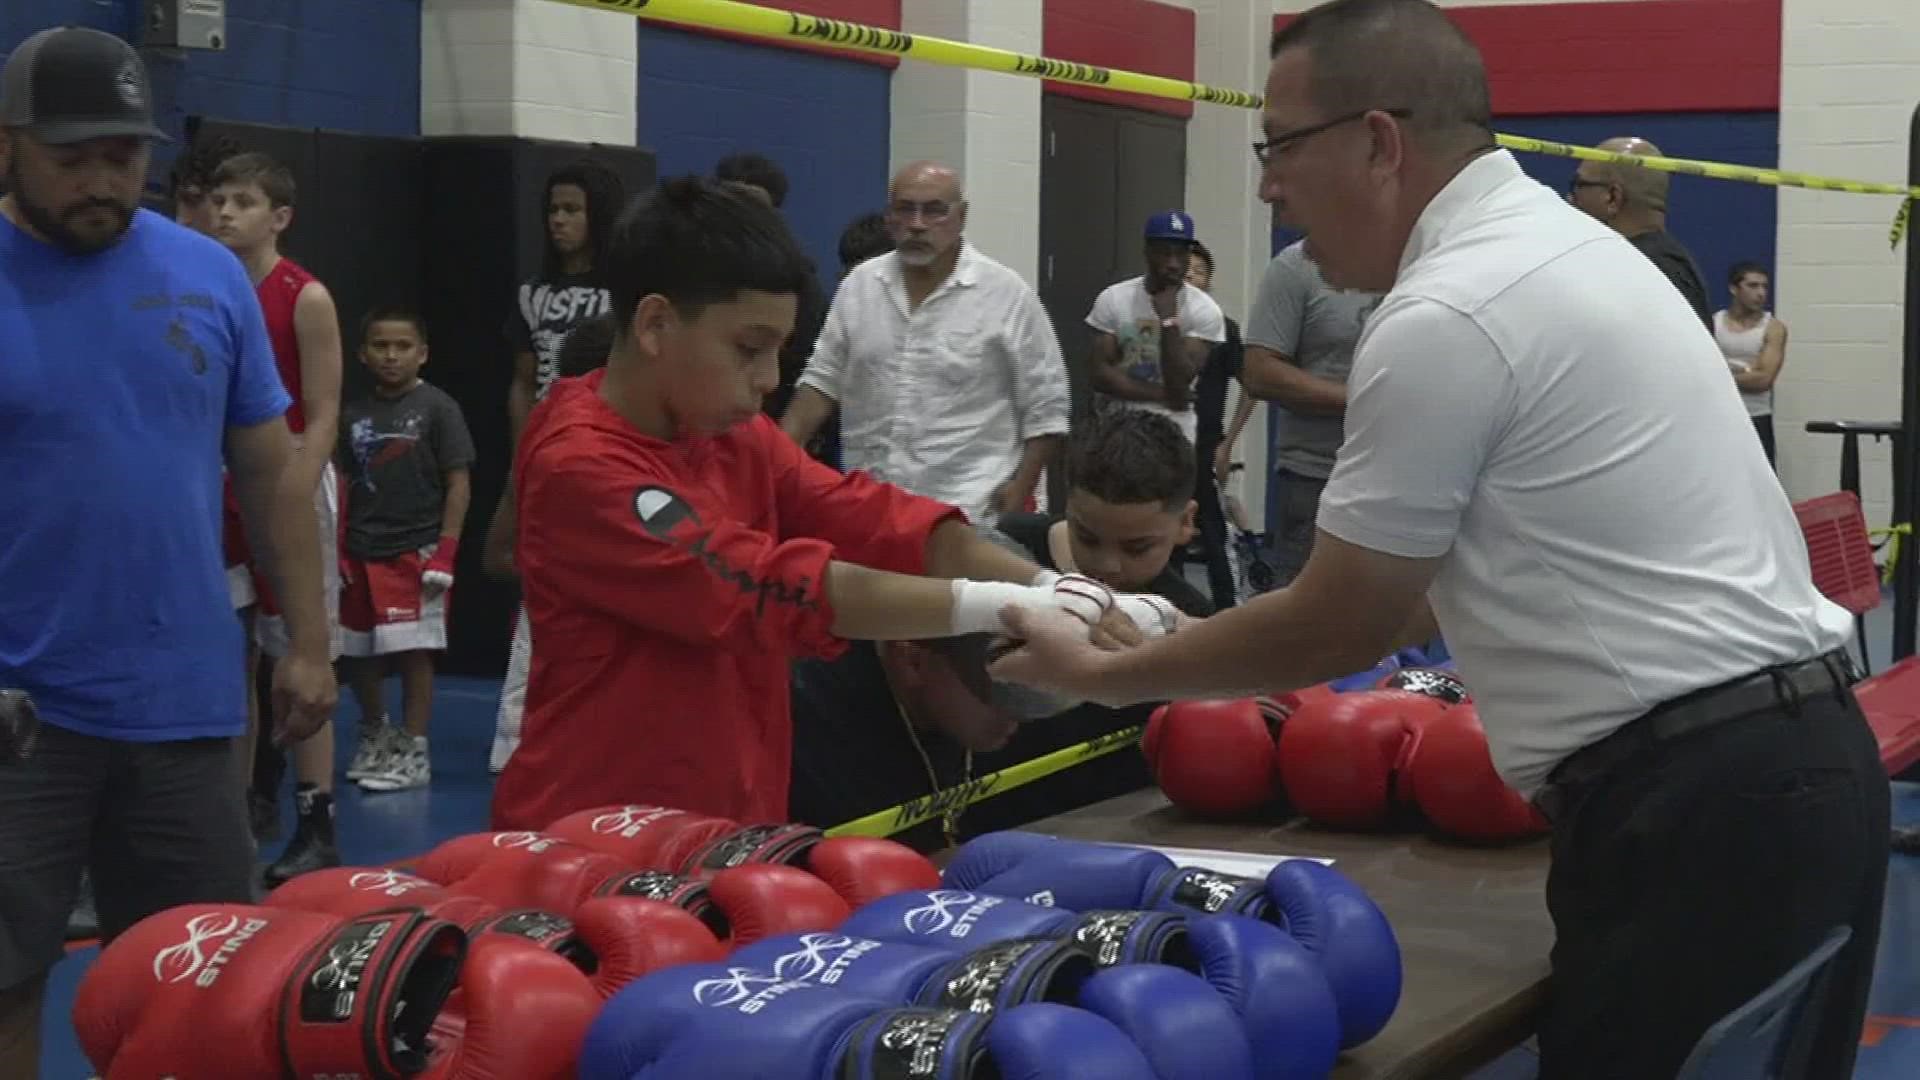 Athletes from around south Texas competed in local boxing tournament.